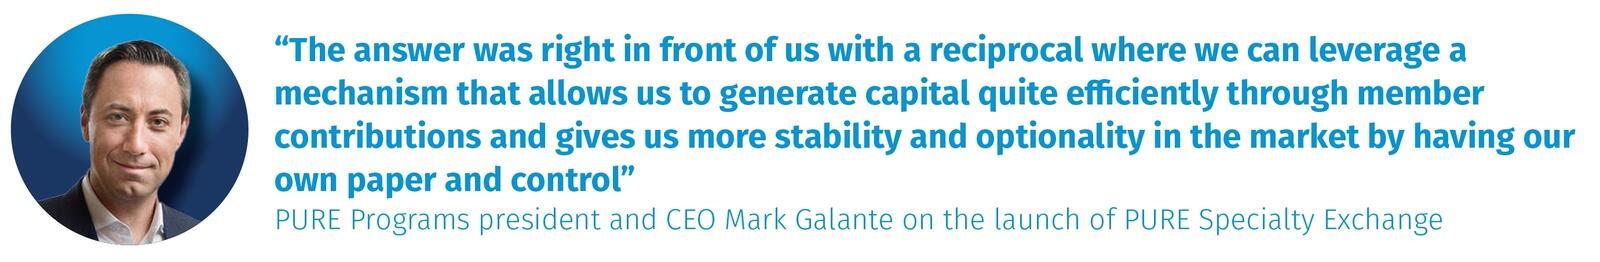 PURE Programs president and CEO Mark Galante on the launch of PURE Specialty Exchange